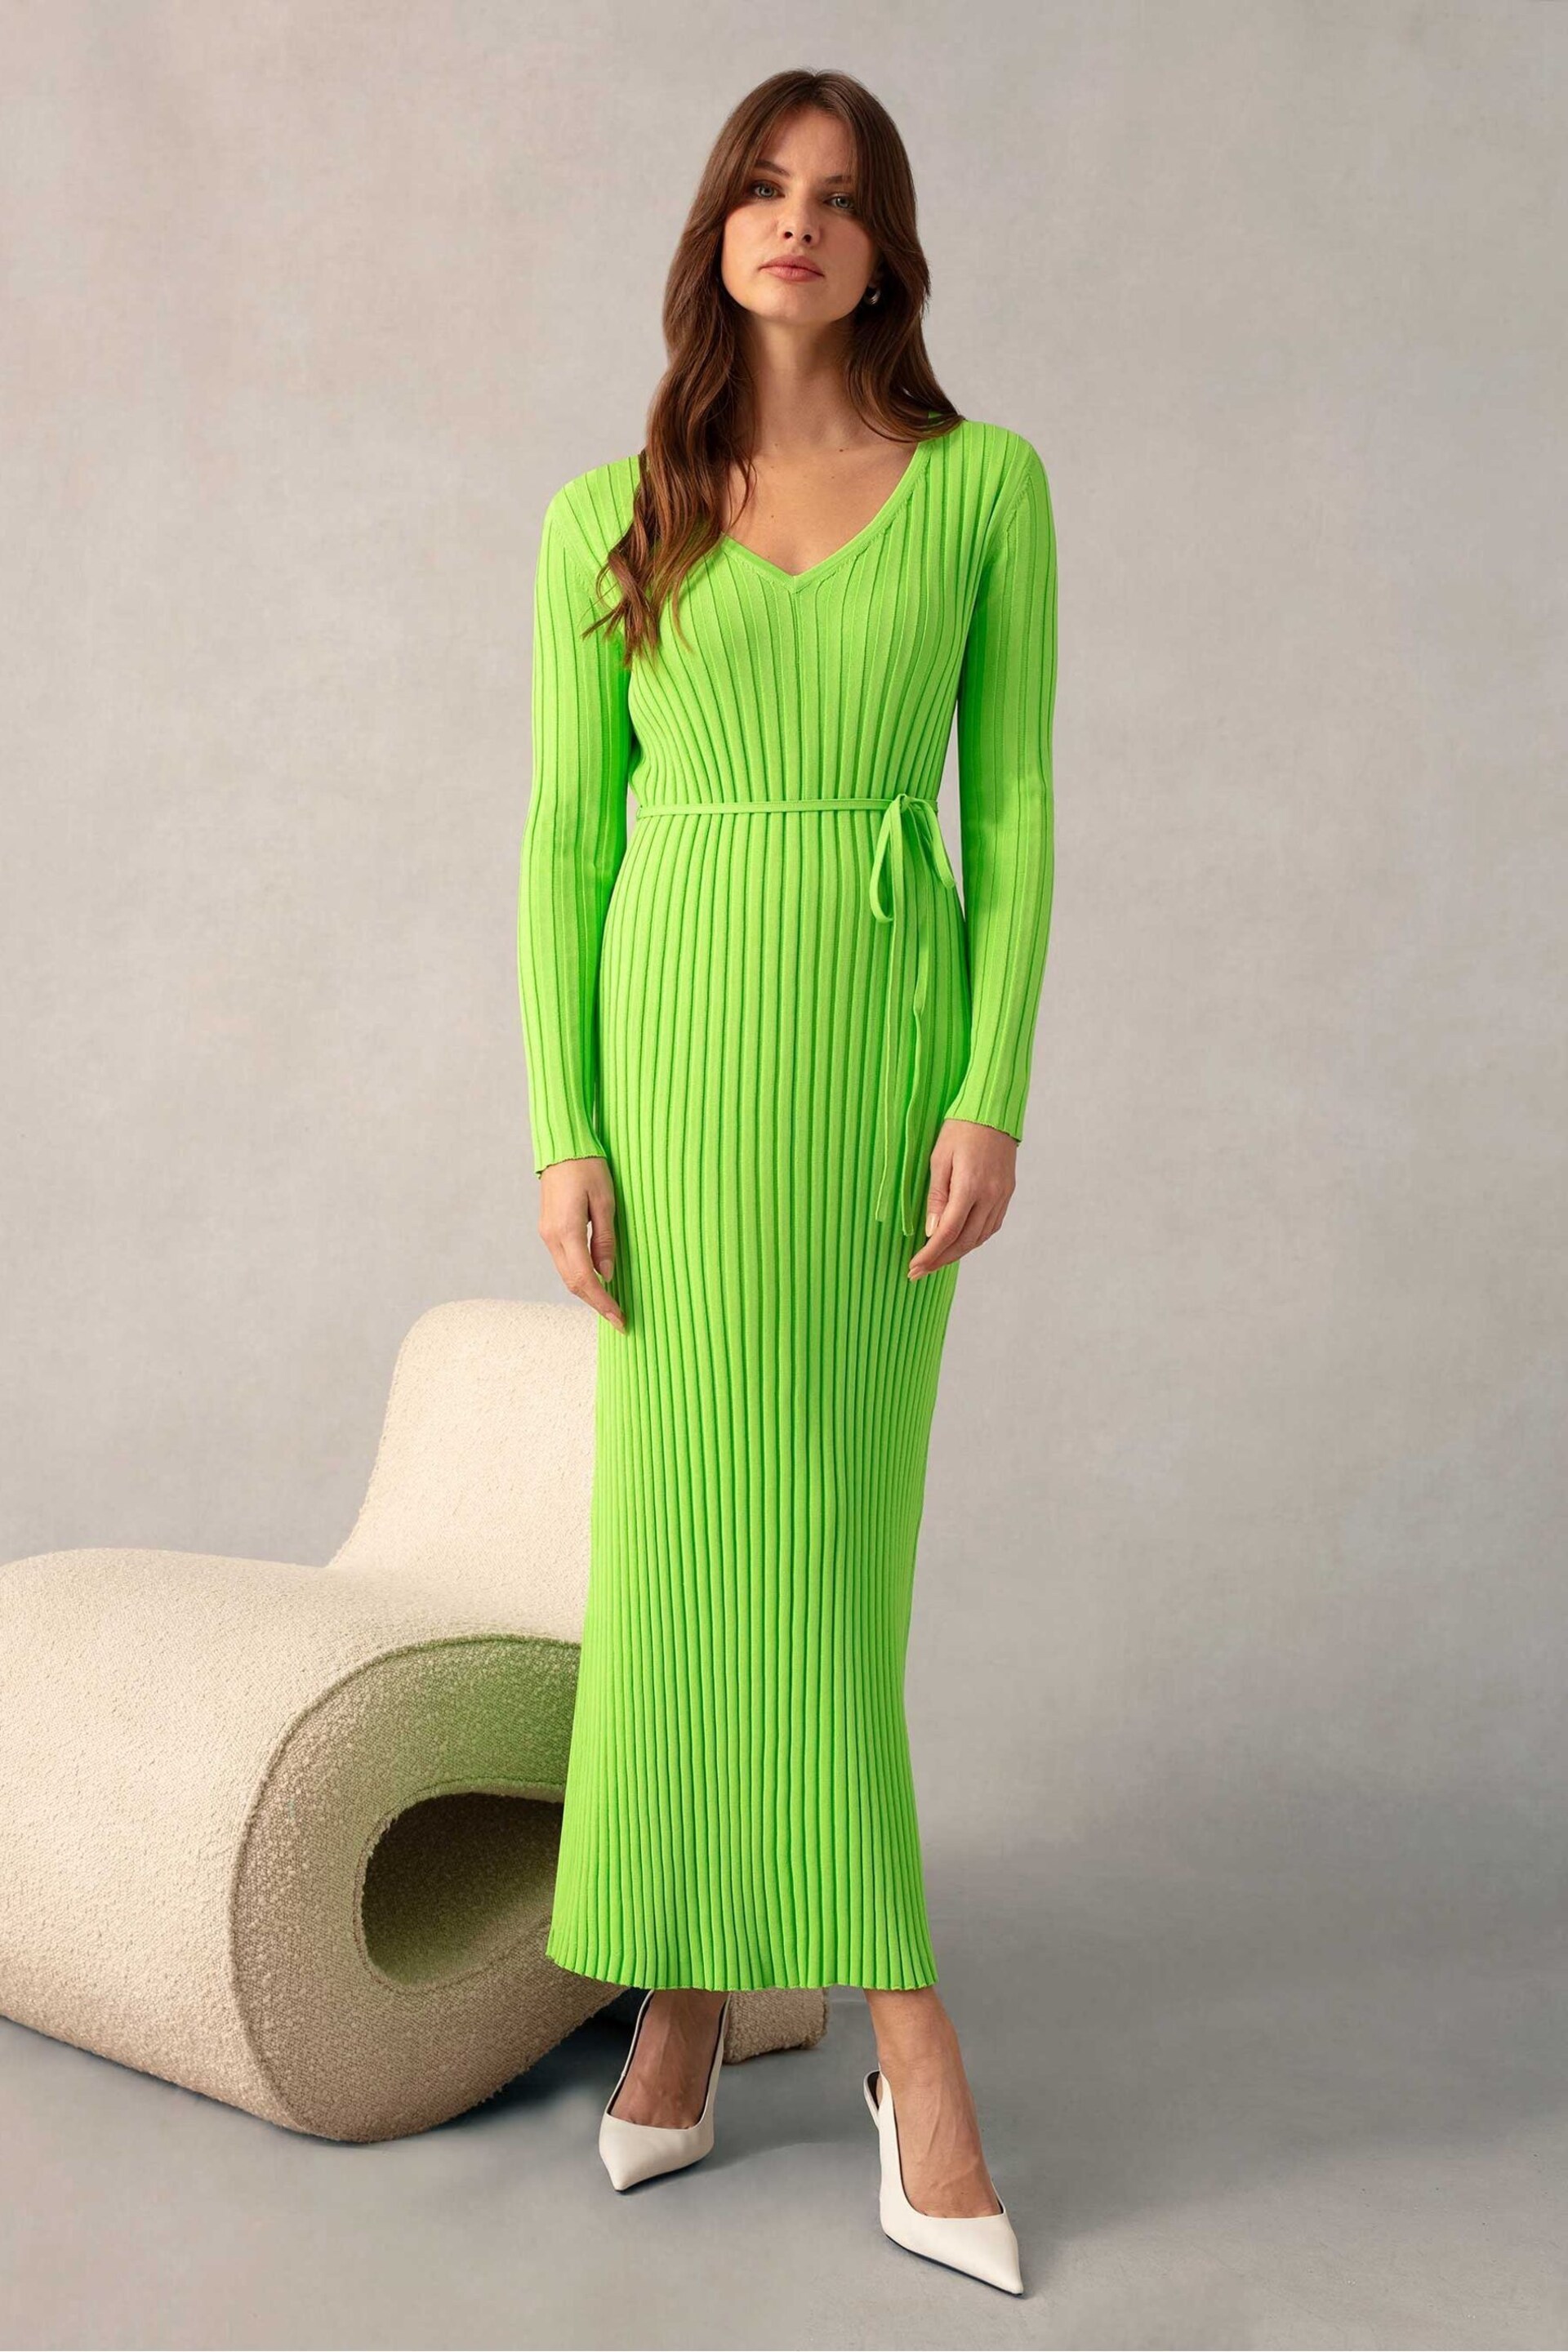 Ro&Zo Green Lime Wide Rib Knit V-Neck Dress - Image 1 of 6